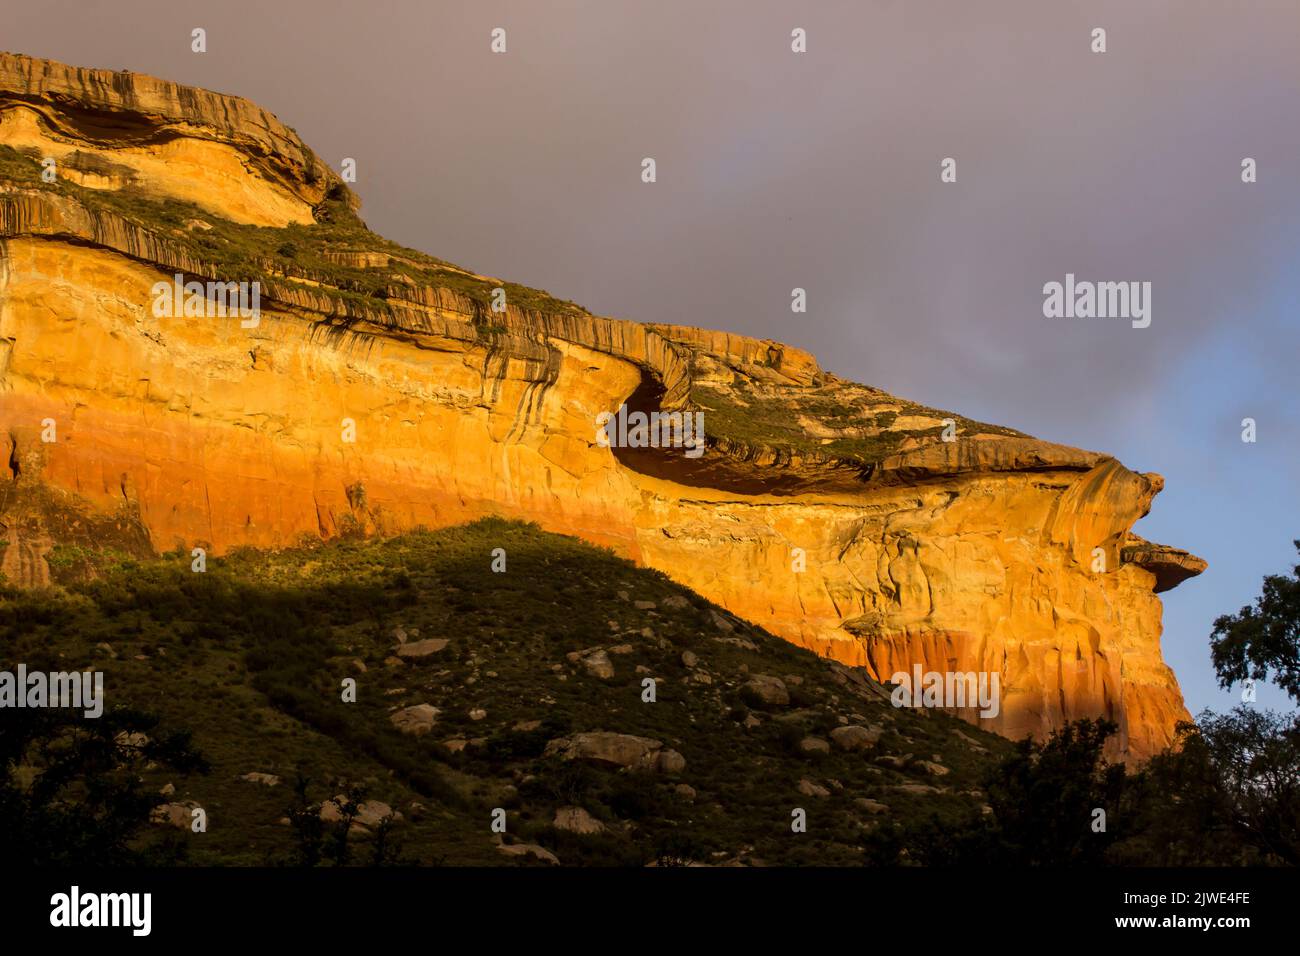 The Mushroom rock, one of the iconic landmarks of the Golden Gate Highlands National Park, South Africa, glowing gold in the light of the setting sun. Stock Photo